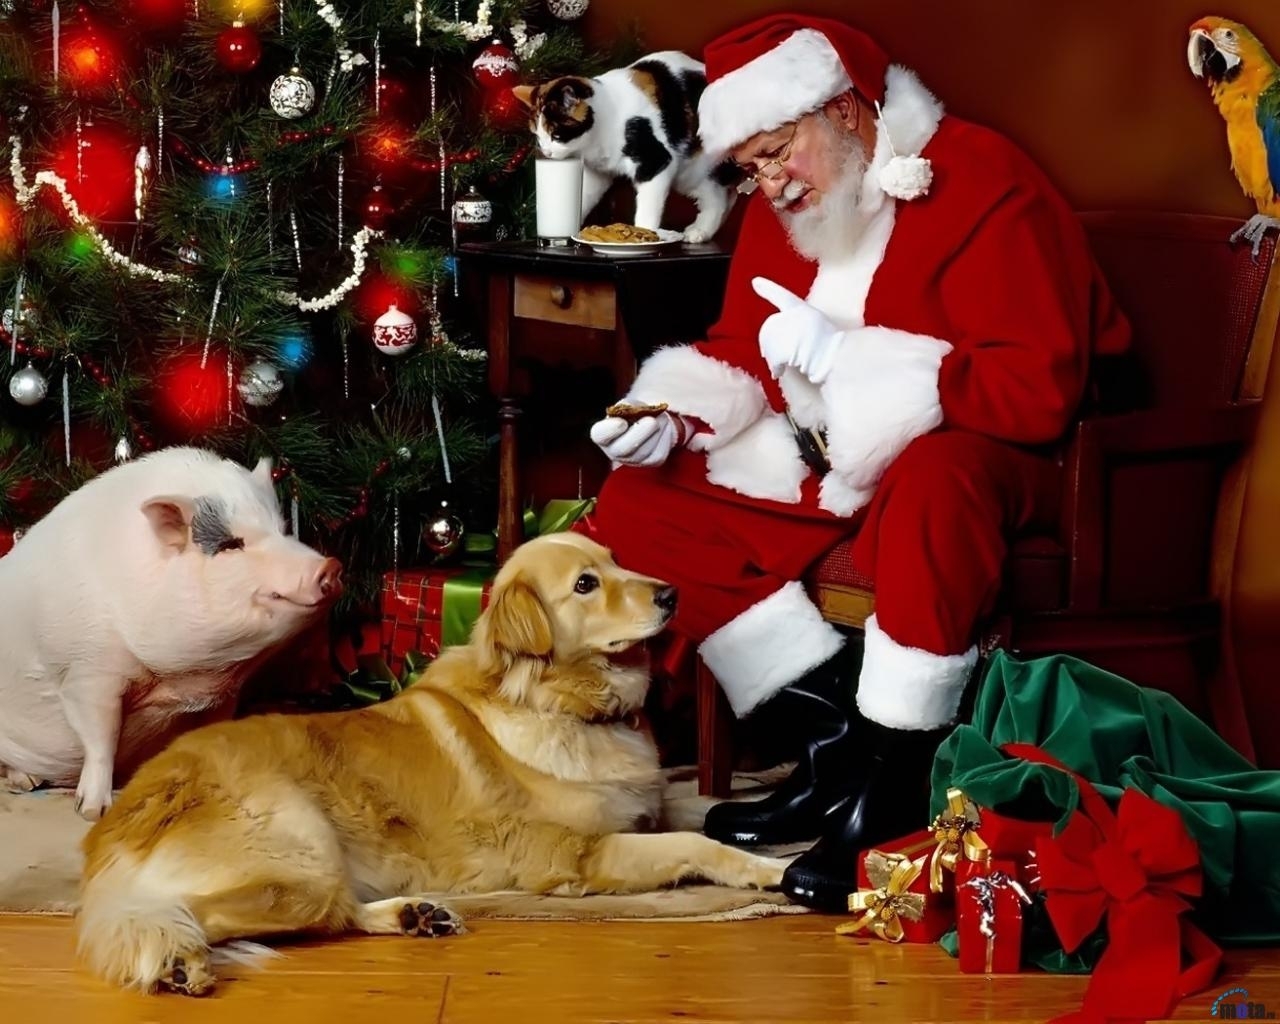 new year, christmas xmas, santa claus, animals, holidays, cats, dogs, jack frost, pigs